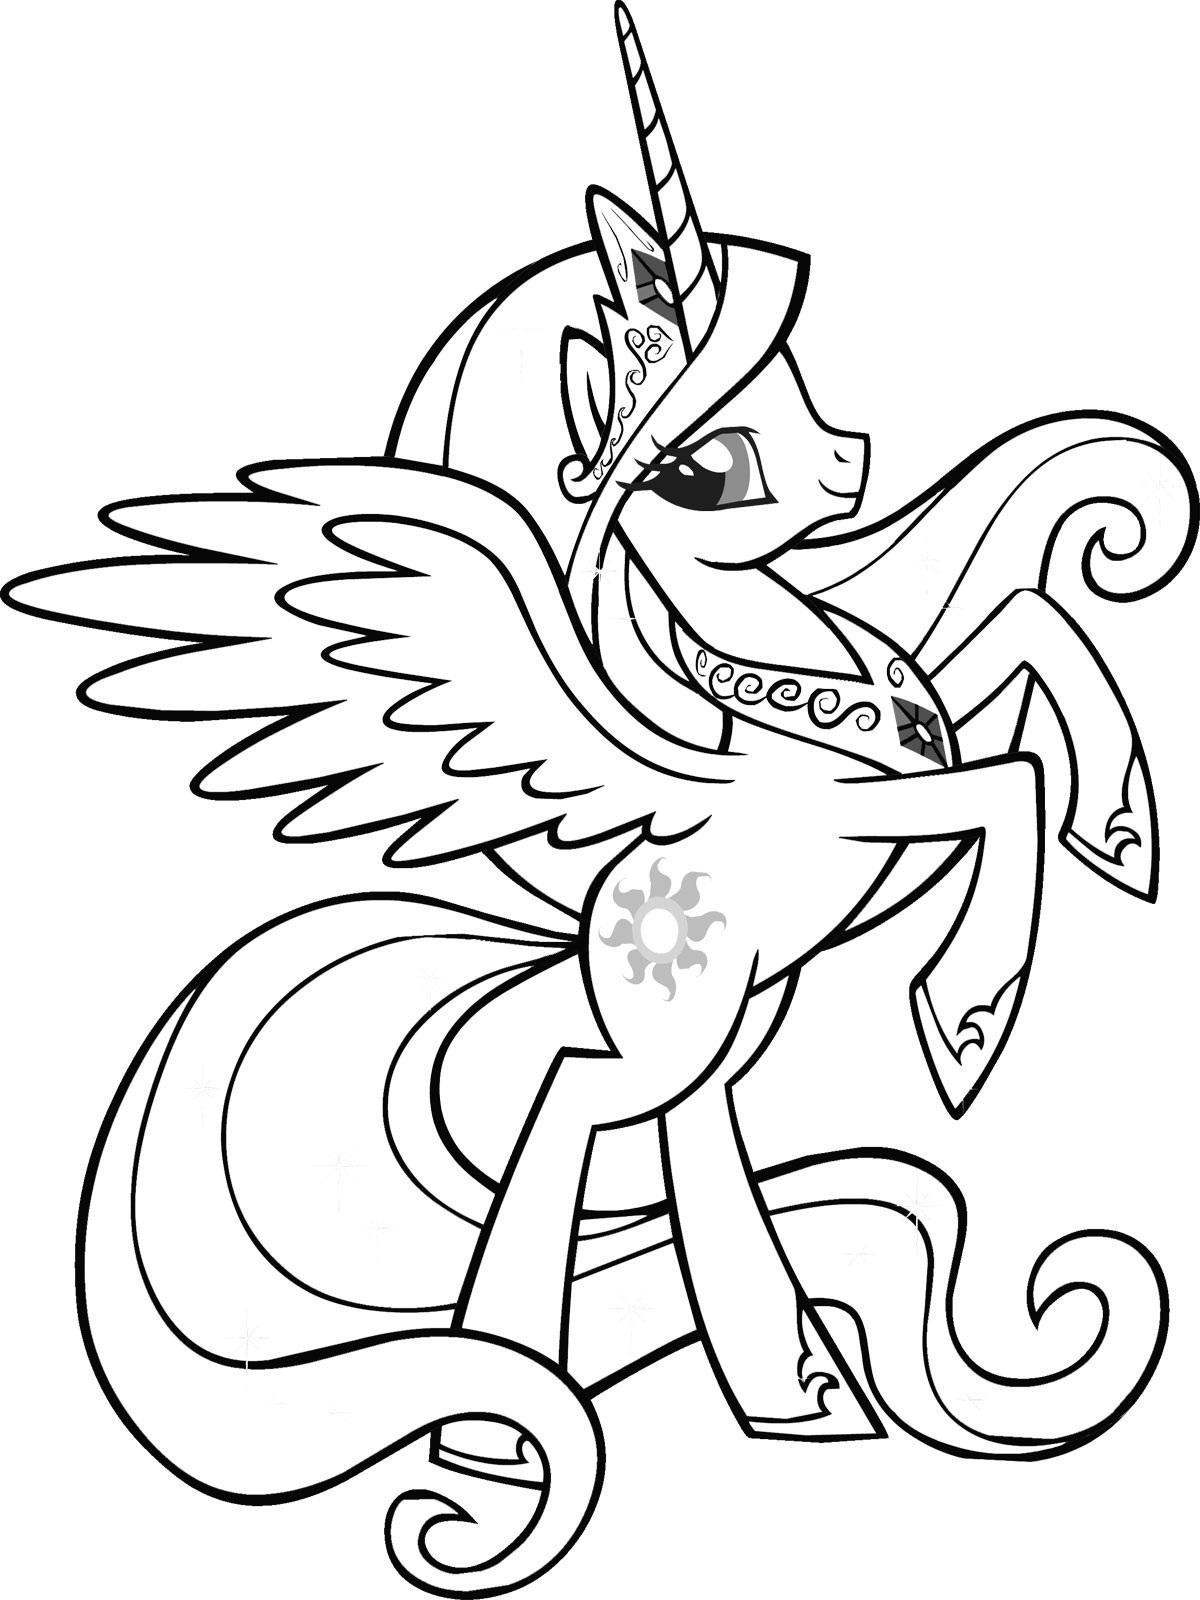 Cute Unicorn Coloring Pages Coloring Pages Excelent Cute Printable Coloring Sheets Image